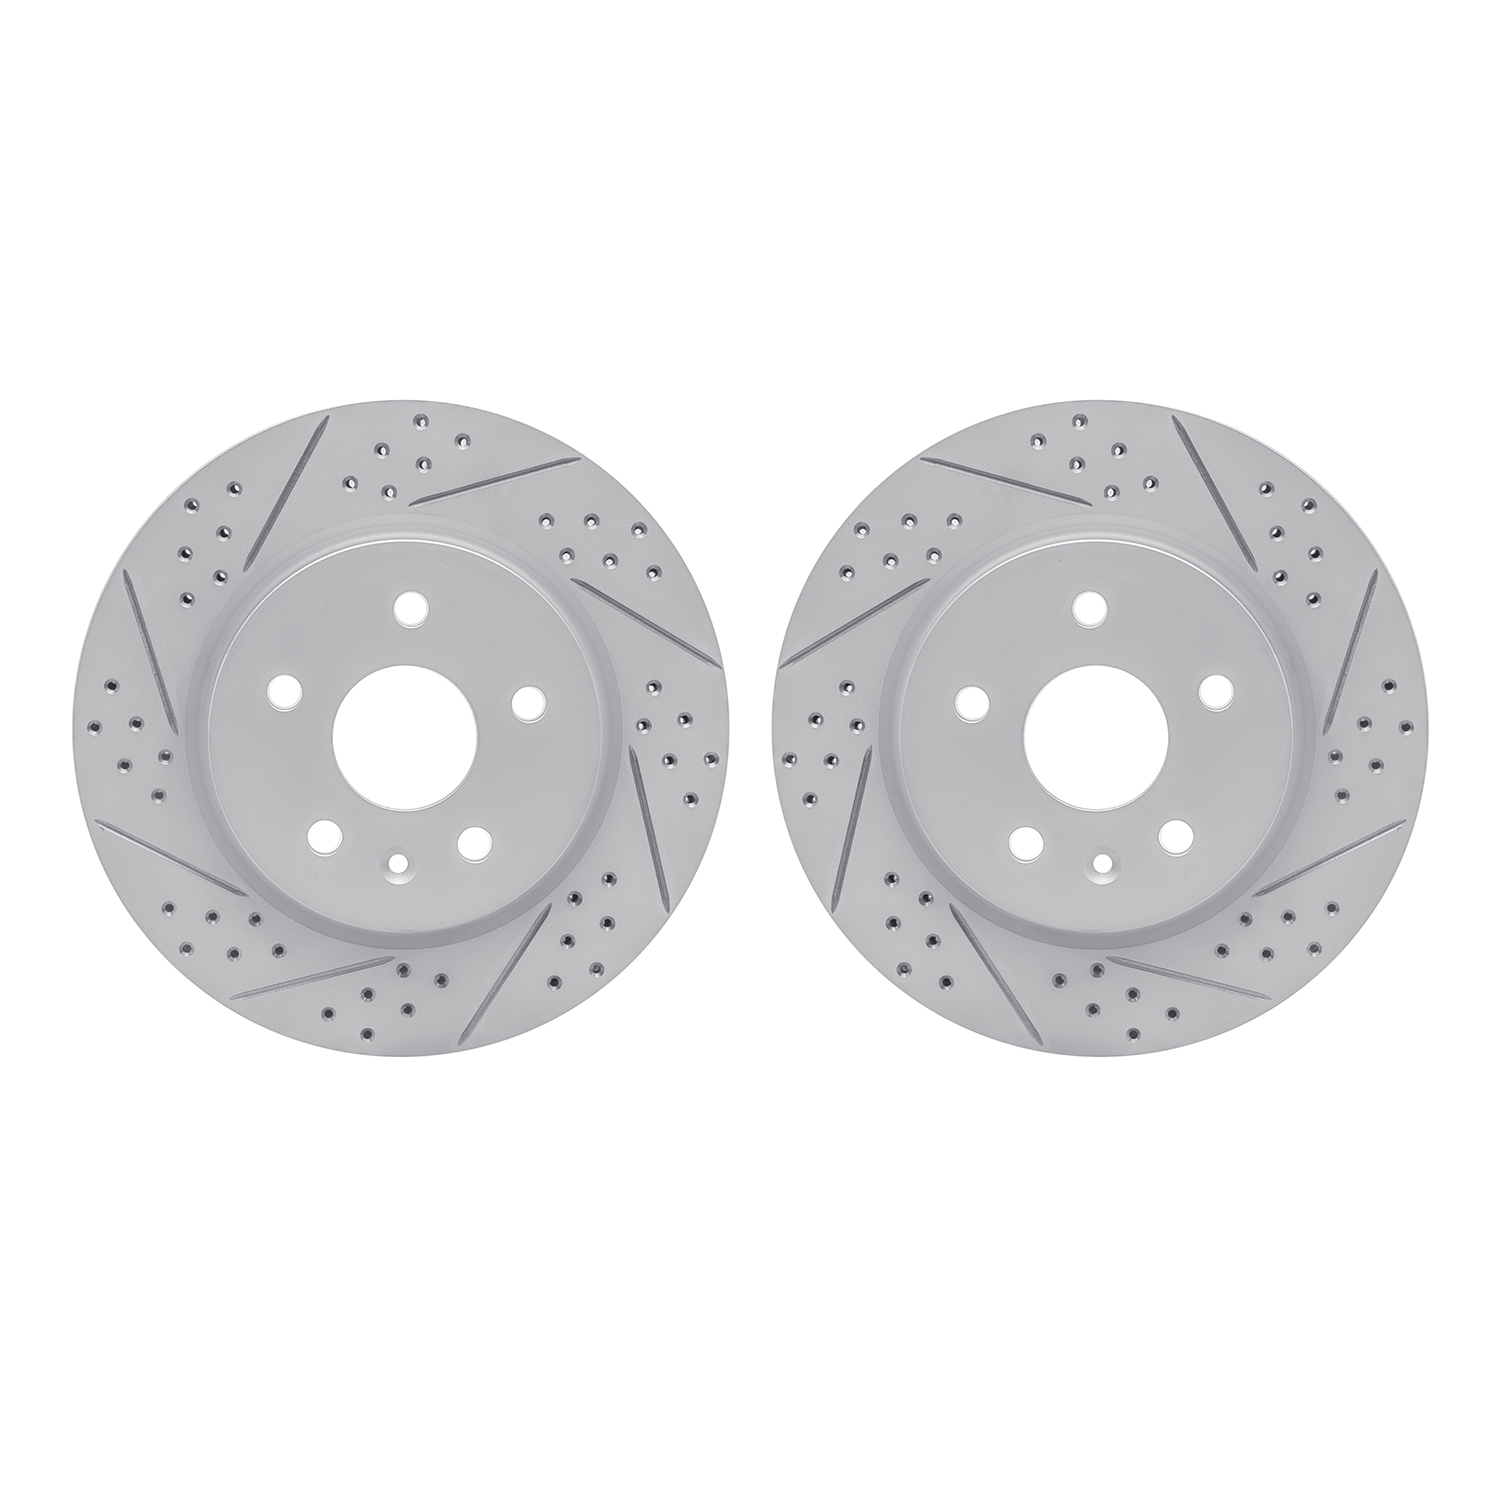 Geoperformance Drilled/Slotted Brake Rotors, Fits Select GM